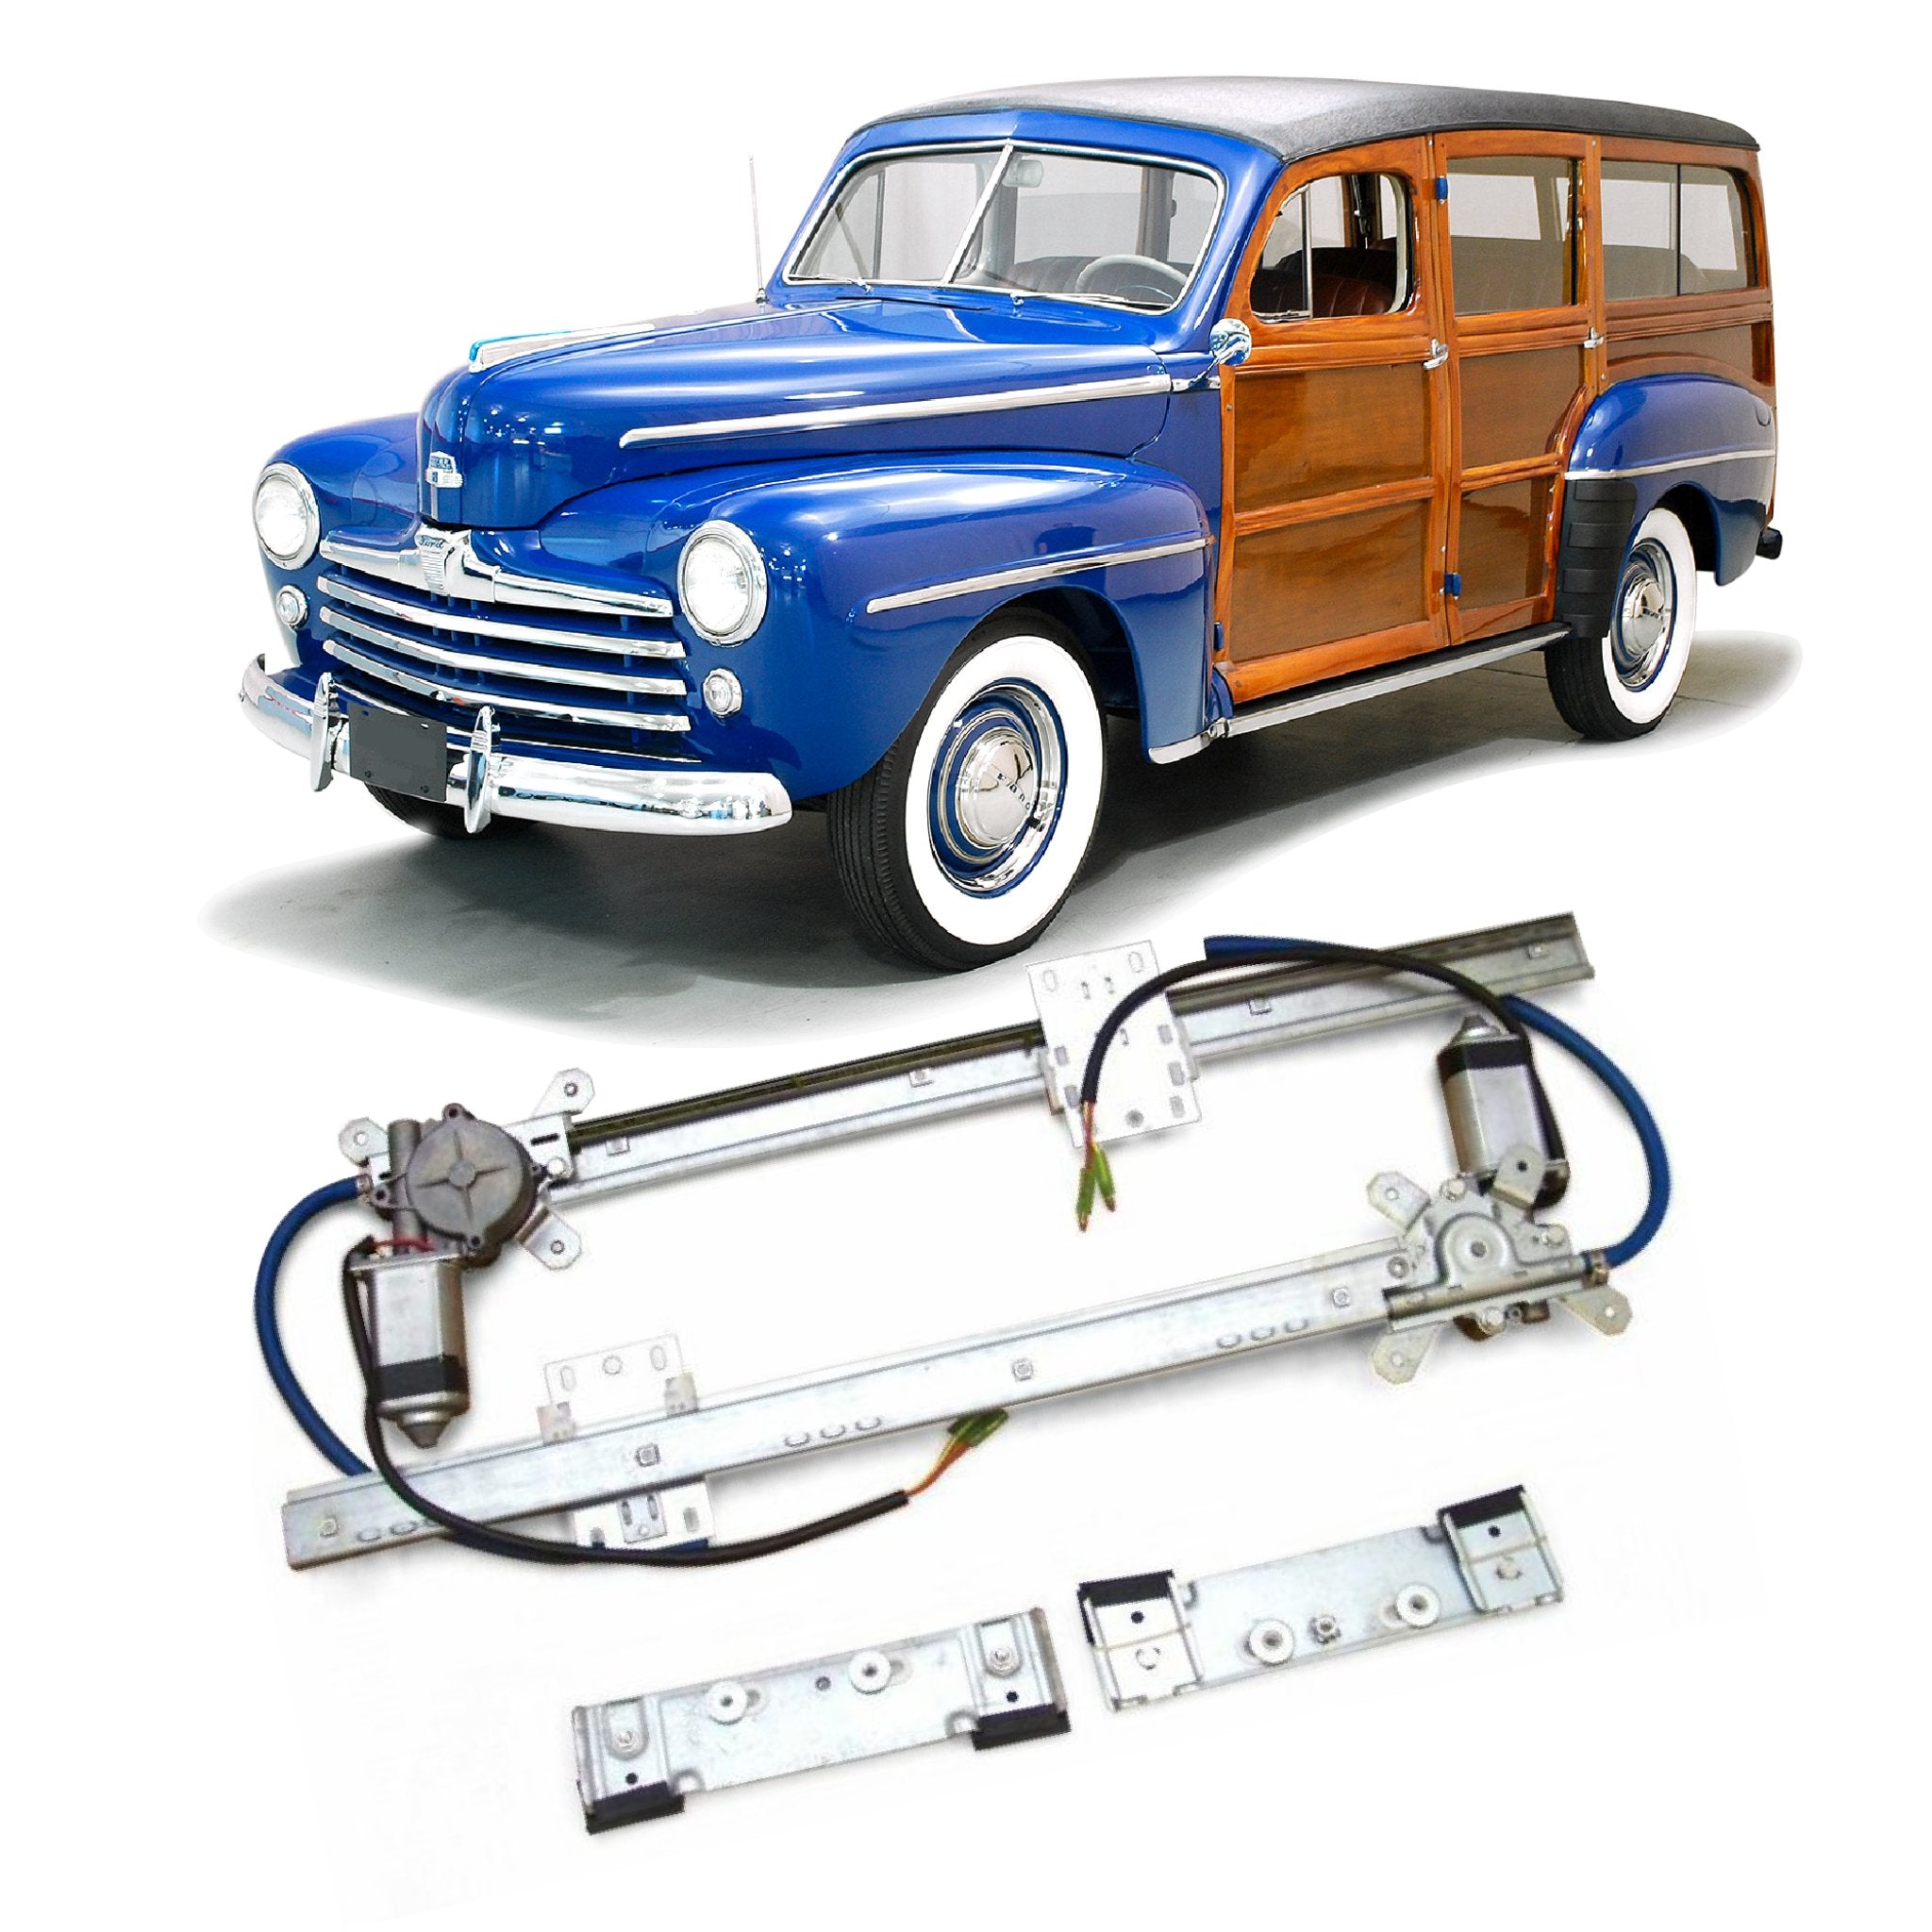 2 Door Power Window Kit for 1947 Ford Station Wagon Standard Deluxe Super Woody